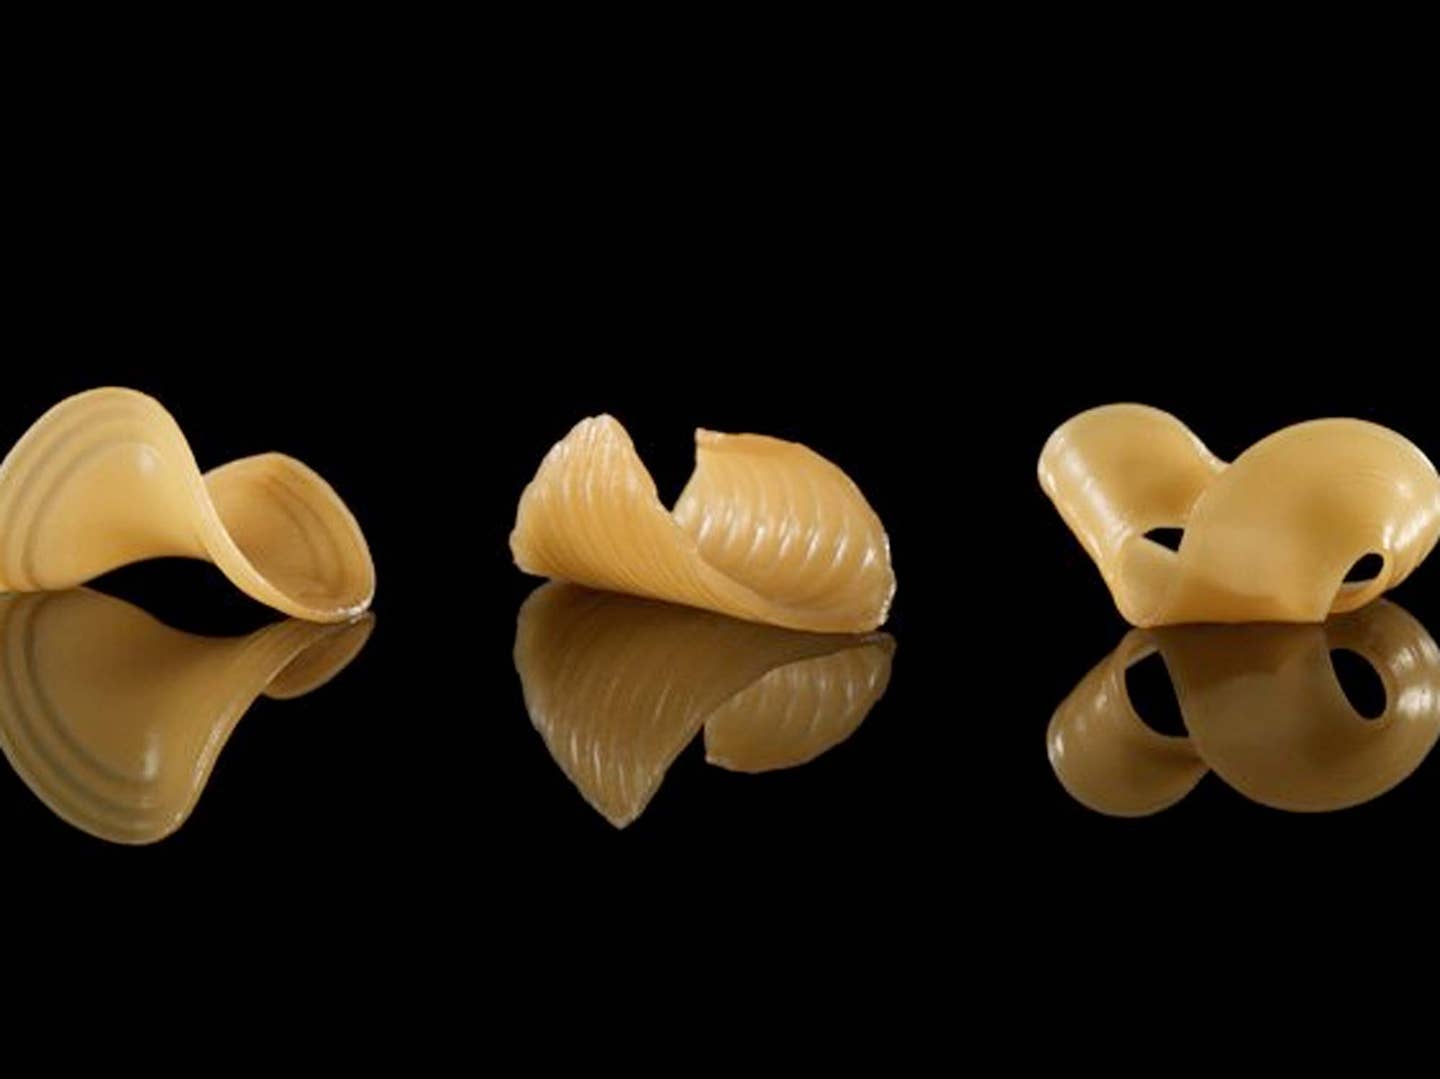 Digitally Engineered Shapeshifting Pasta is Here to Reduce Packaging Waste